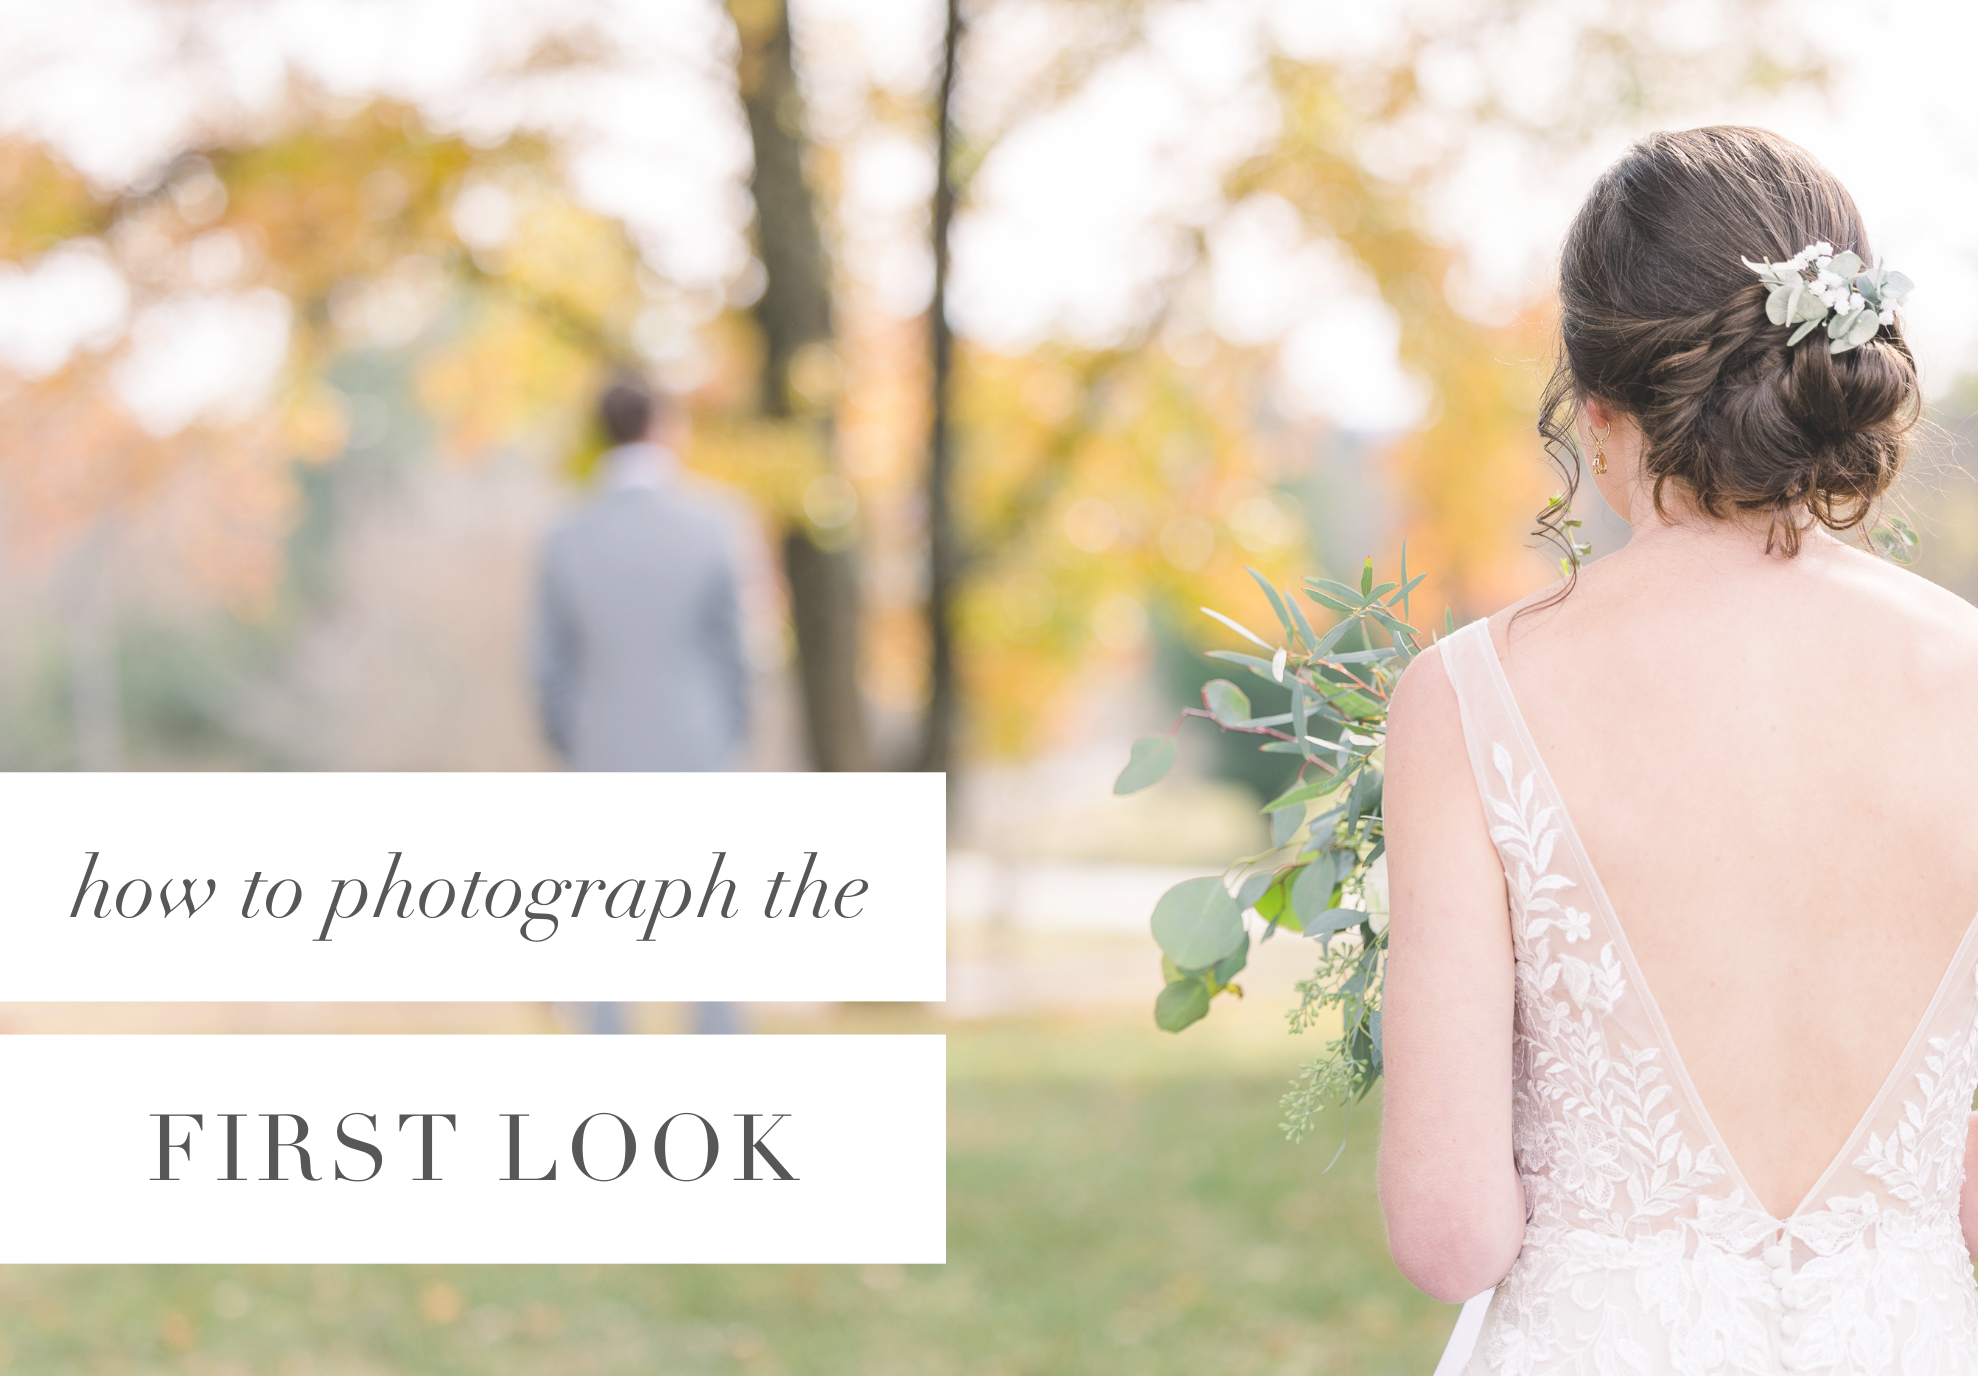 HOW TO PHOTOGRAPH THE FIRST LOOK